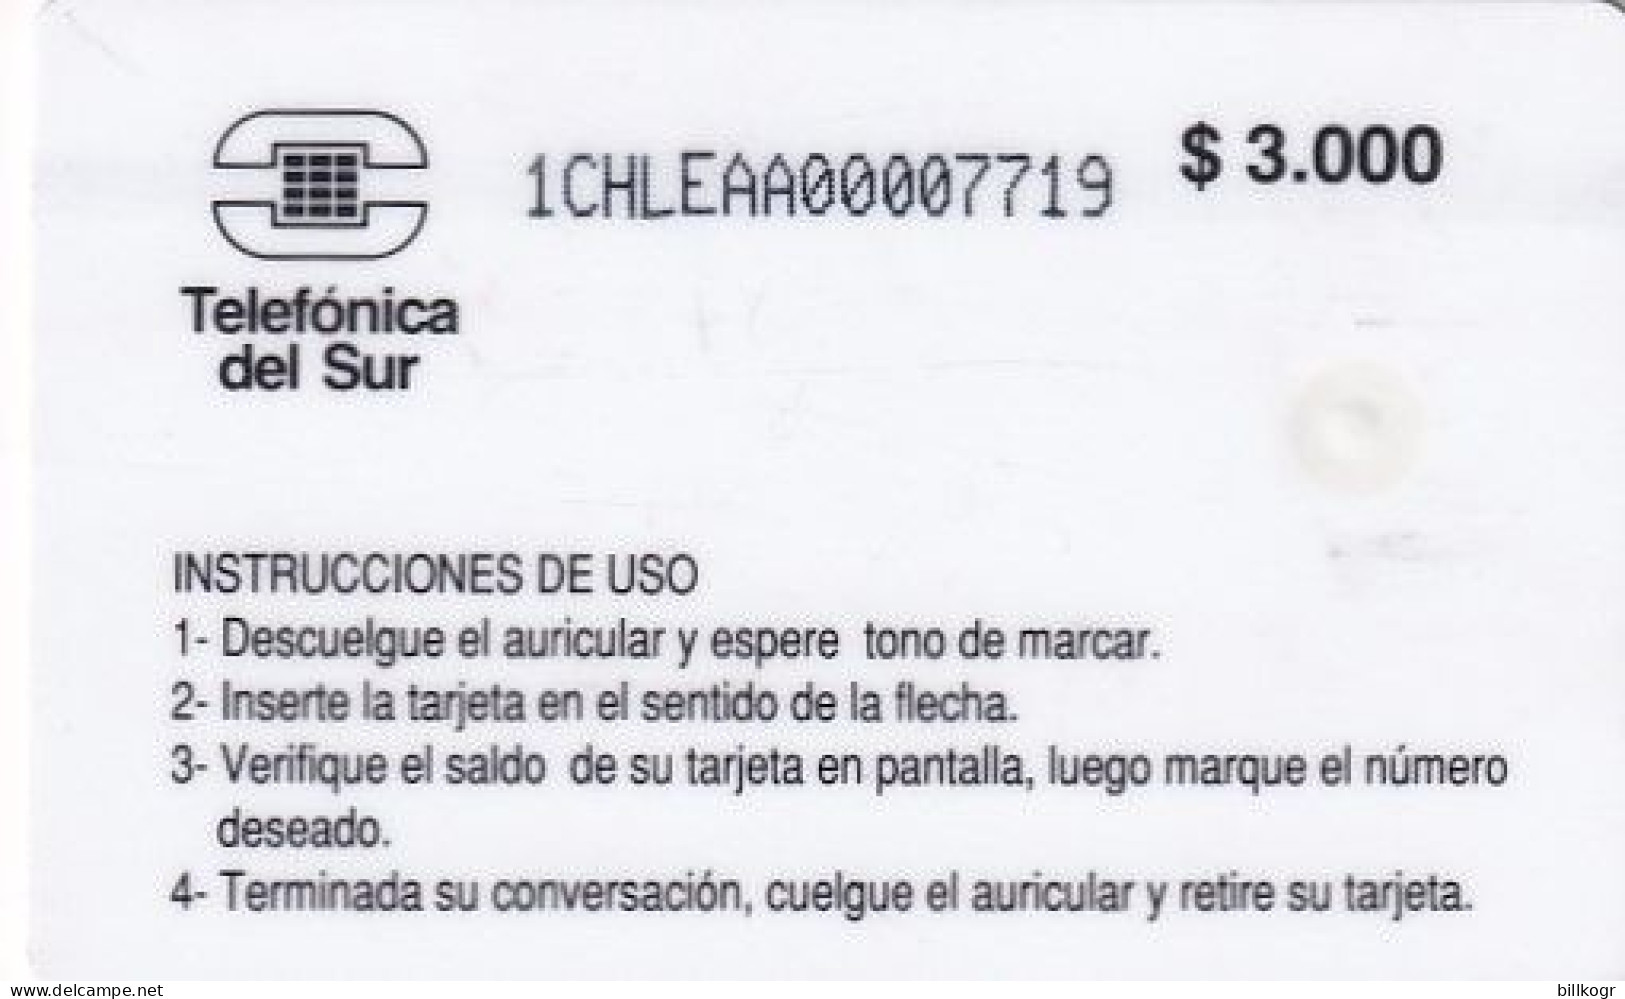 CHILE - Oficinas Comerciales/Puerto Montt, Telefonica Del Sur First Issue $3000, CN : 1CHLEAB, Used - Chile